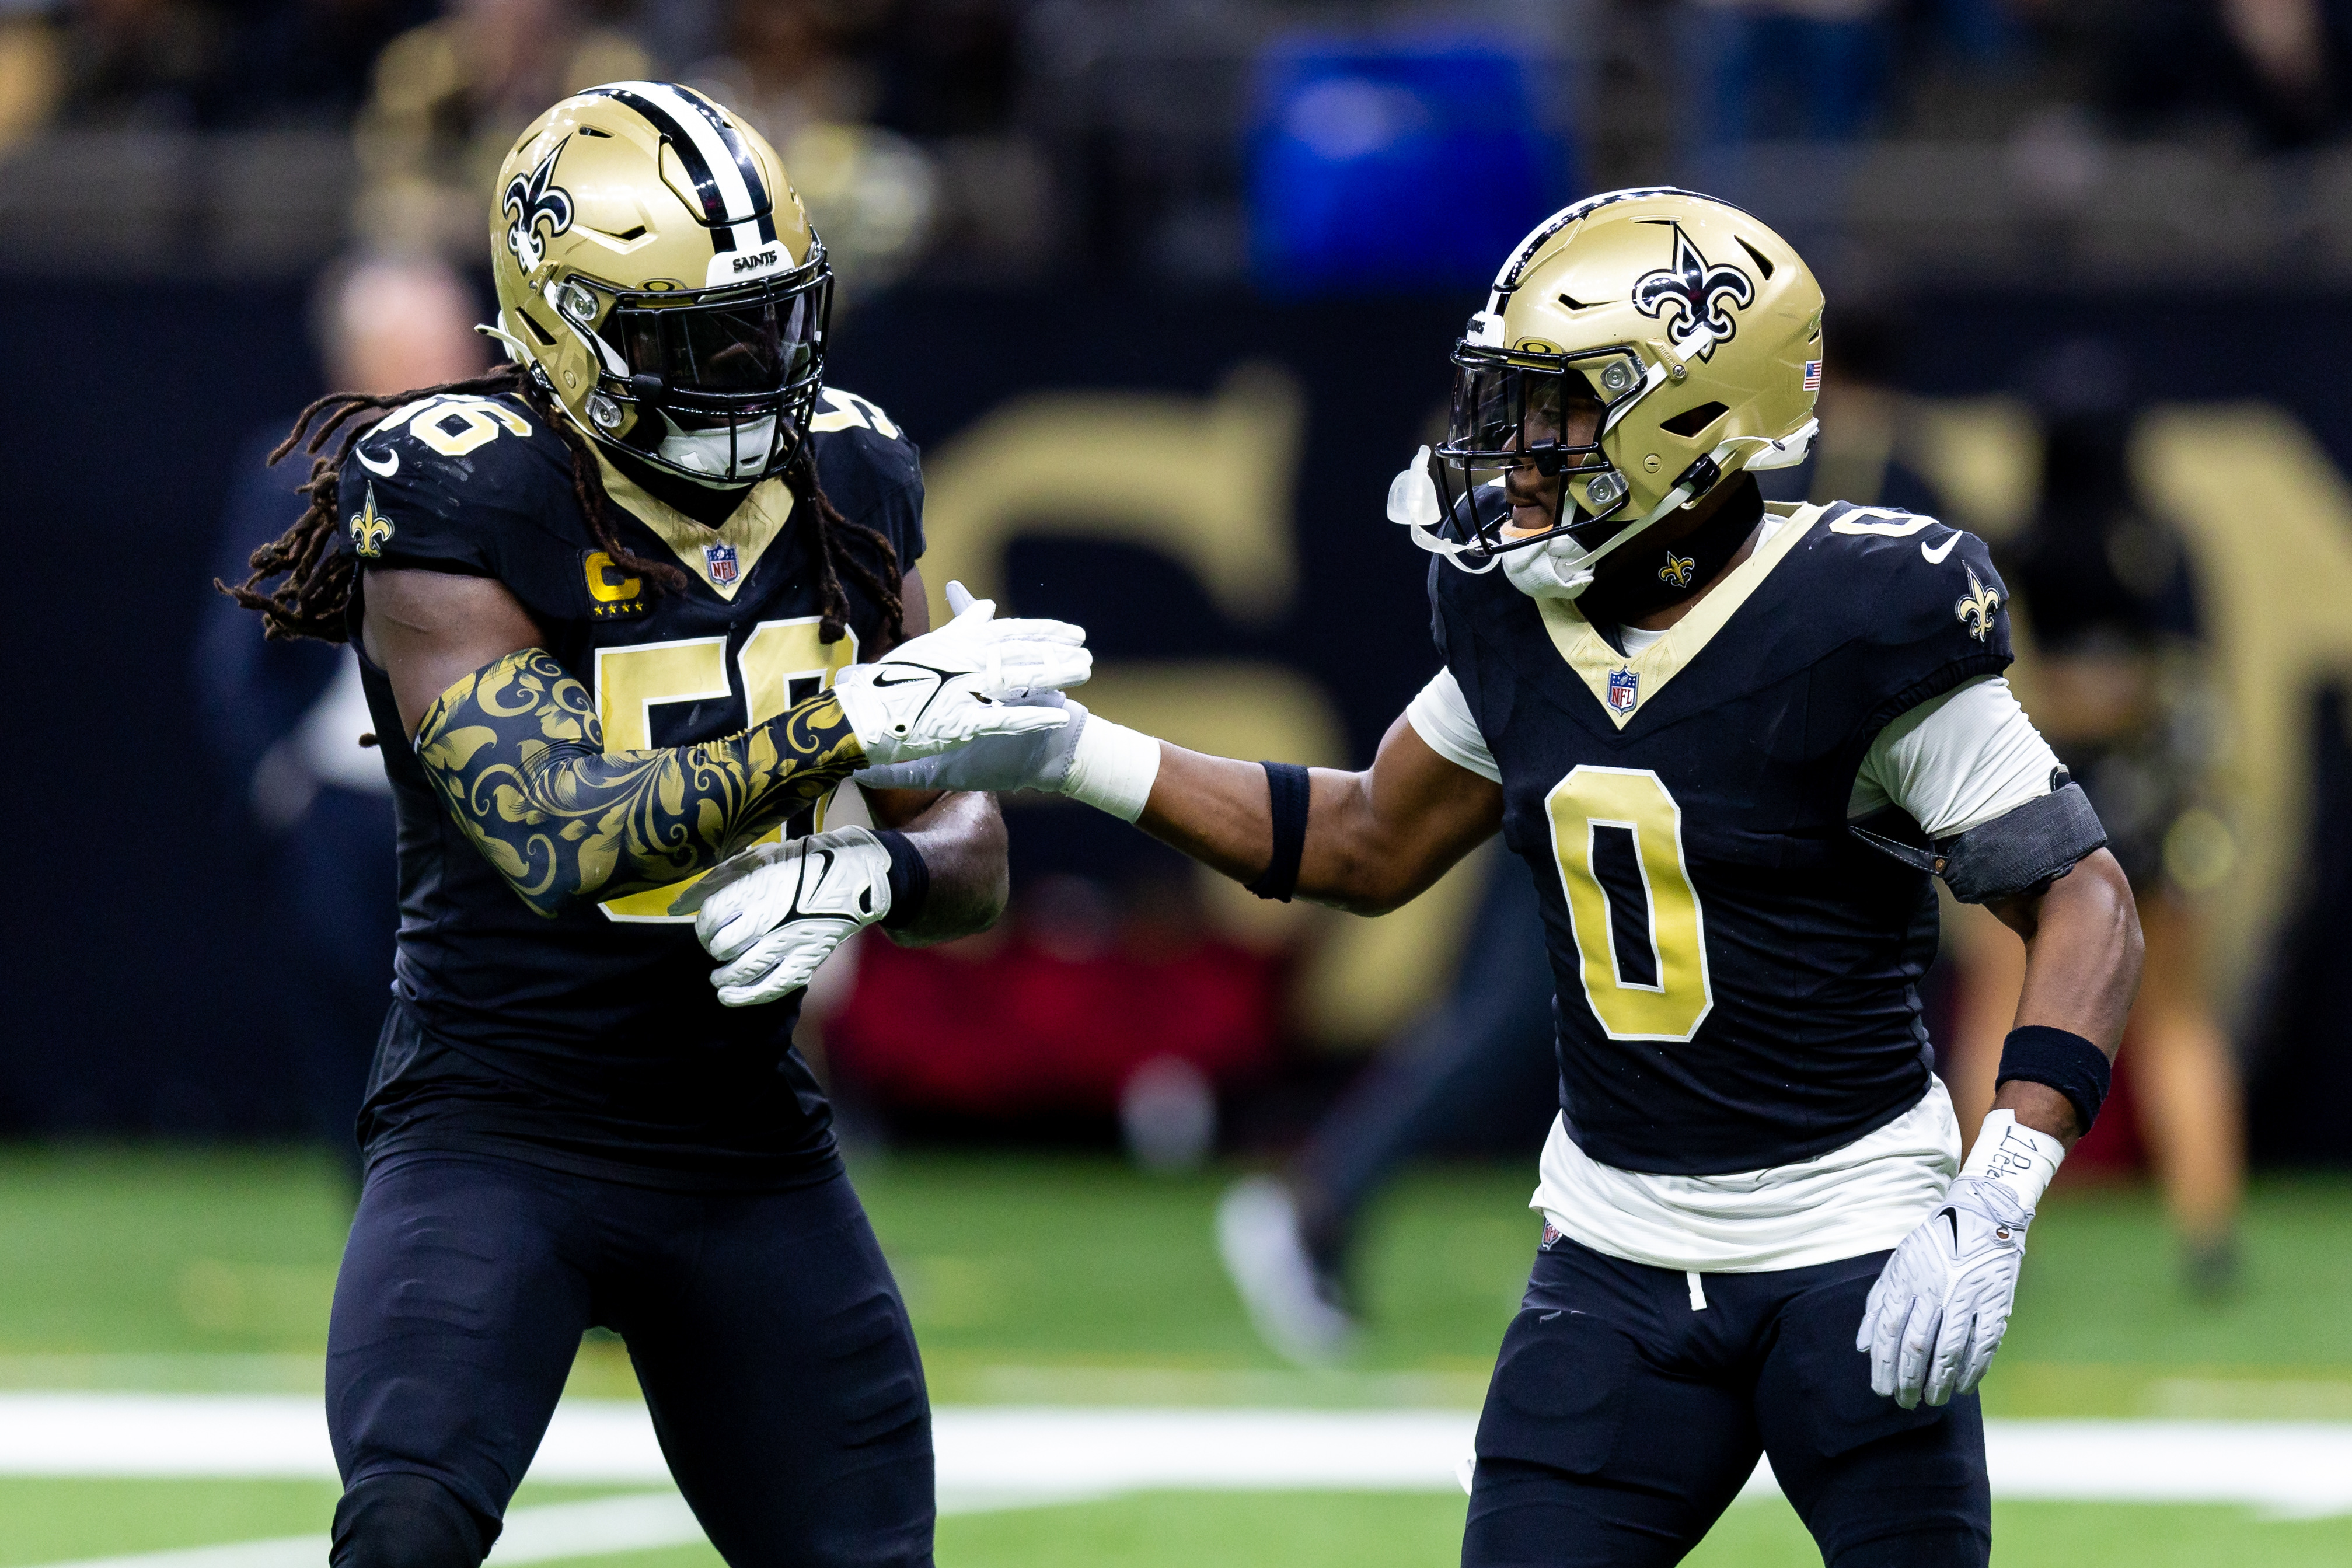 New Orleans Saints linebacker Demario Davis (56) and safety Ugo Amadi (0) celebrate after a play.